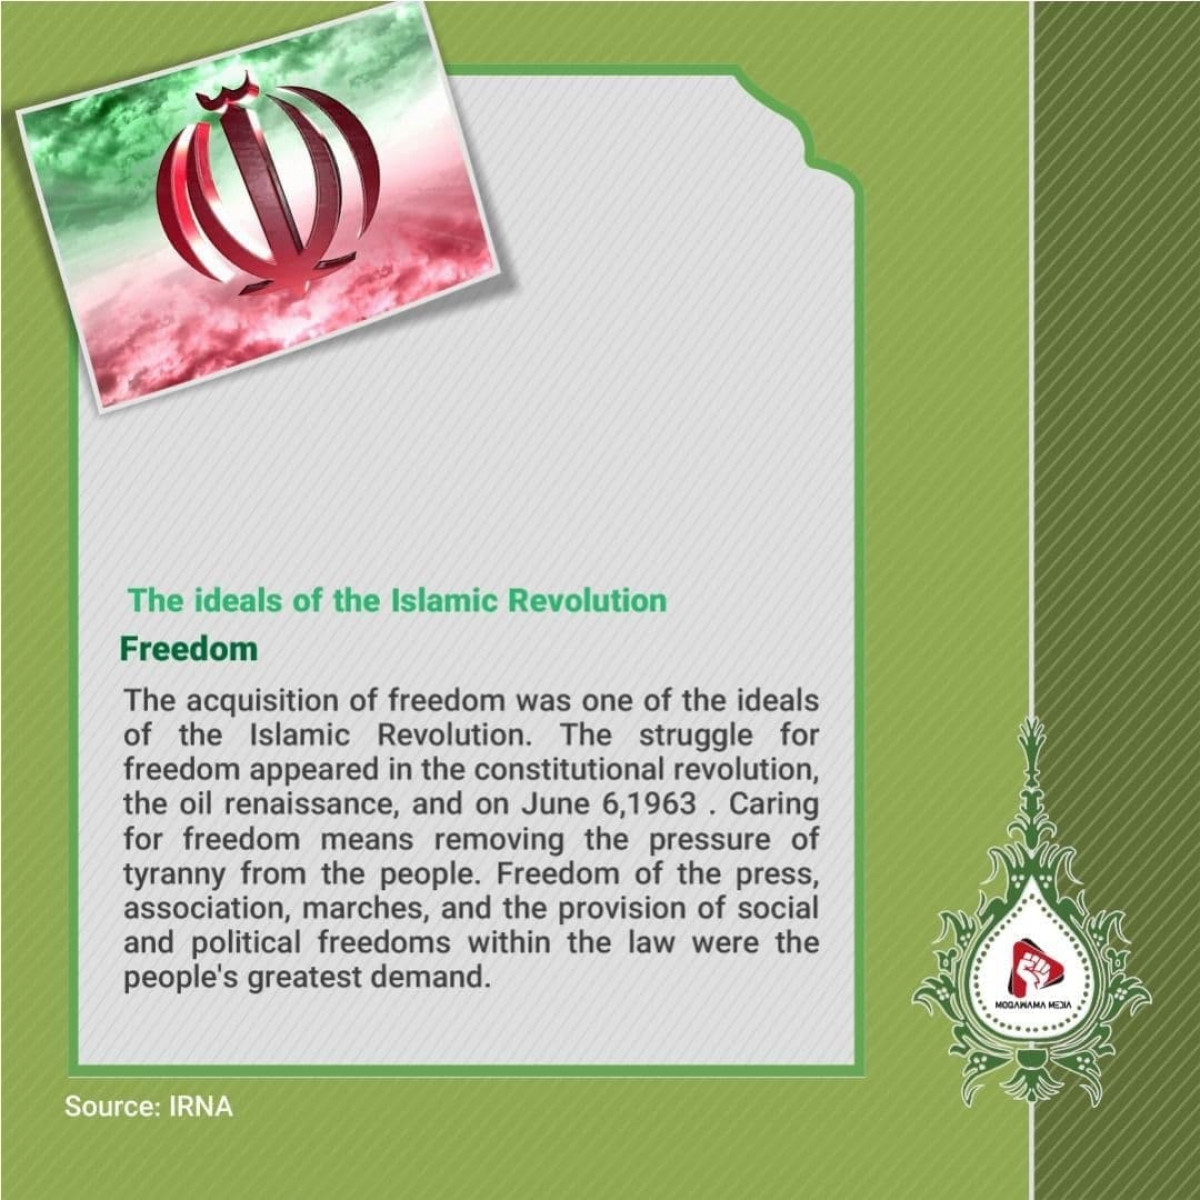 The ideals of the Islamic Revolution: Freedom